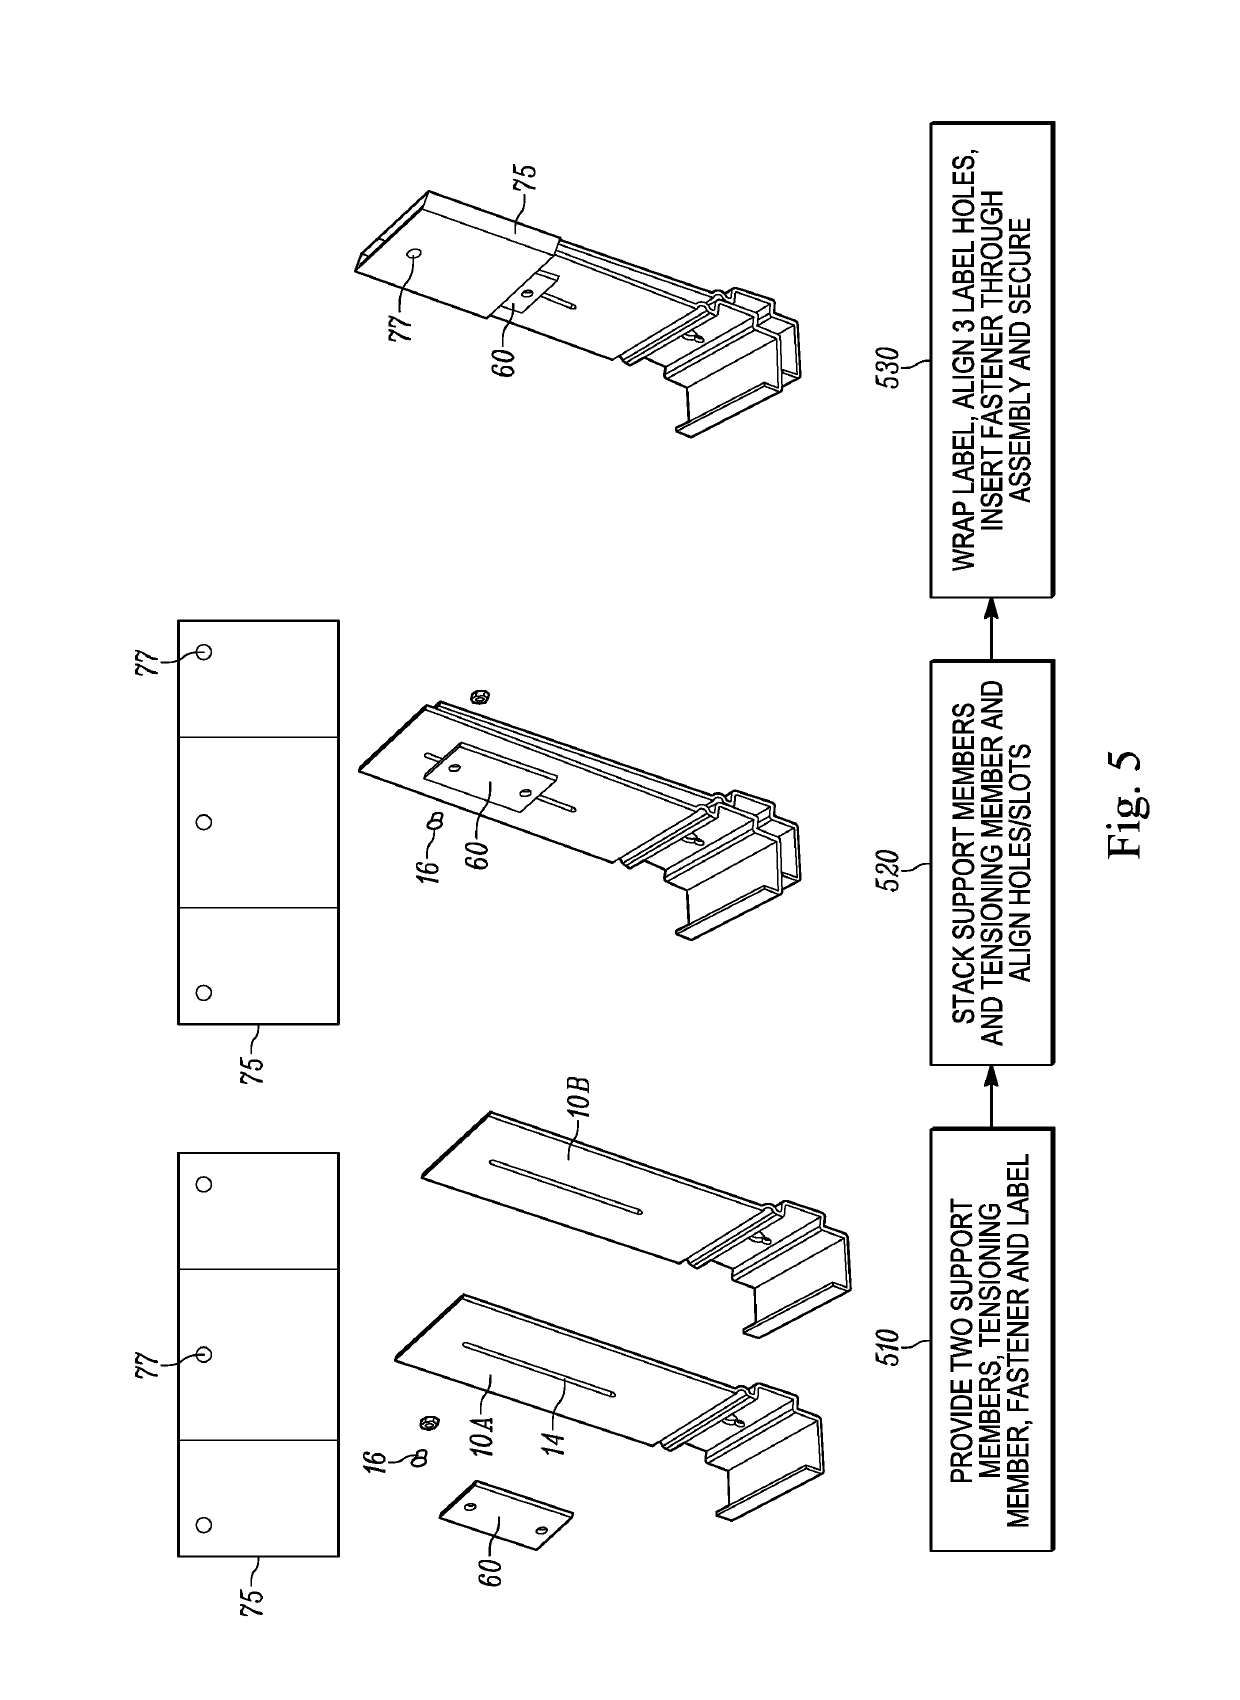 Mounting system for collectables and mounting system packaging